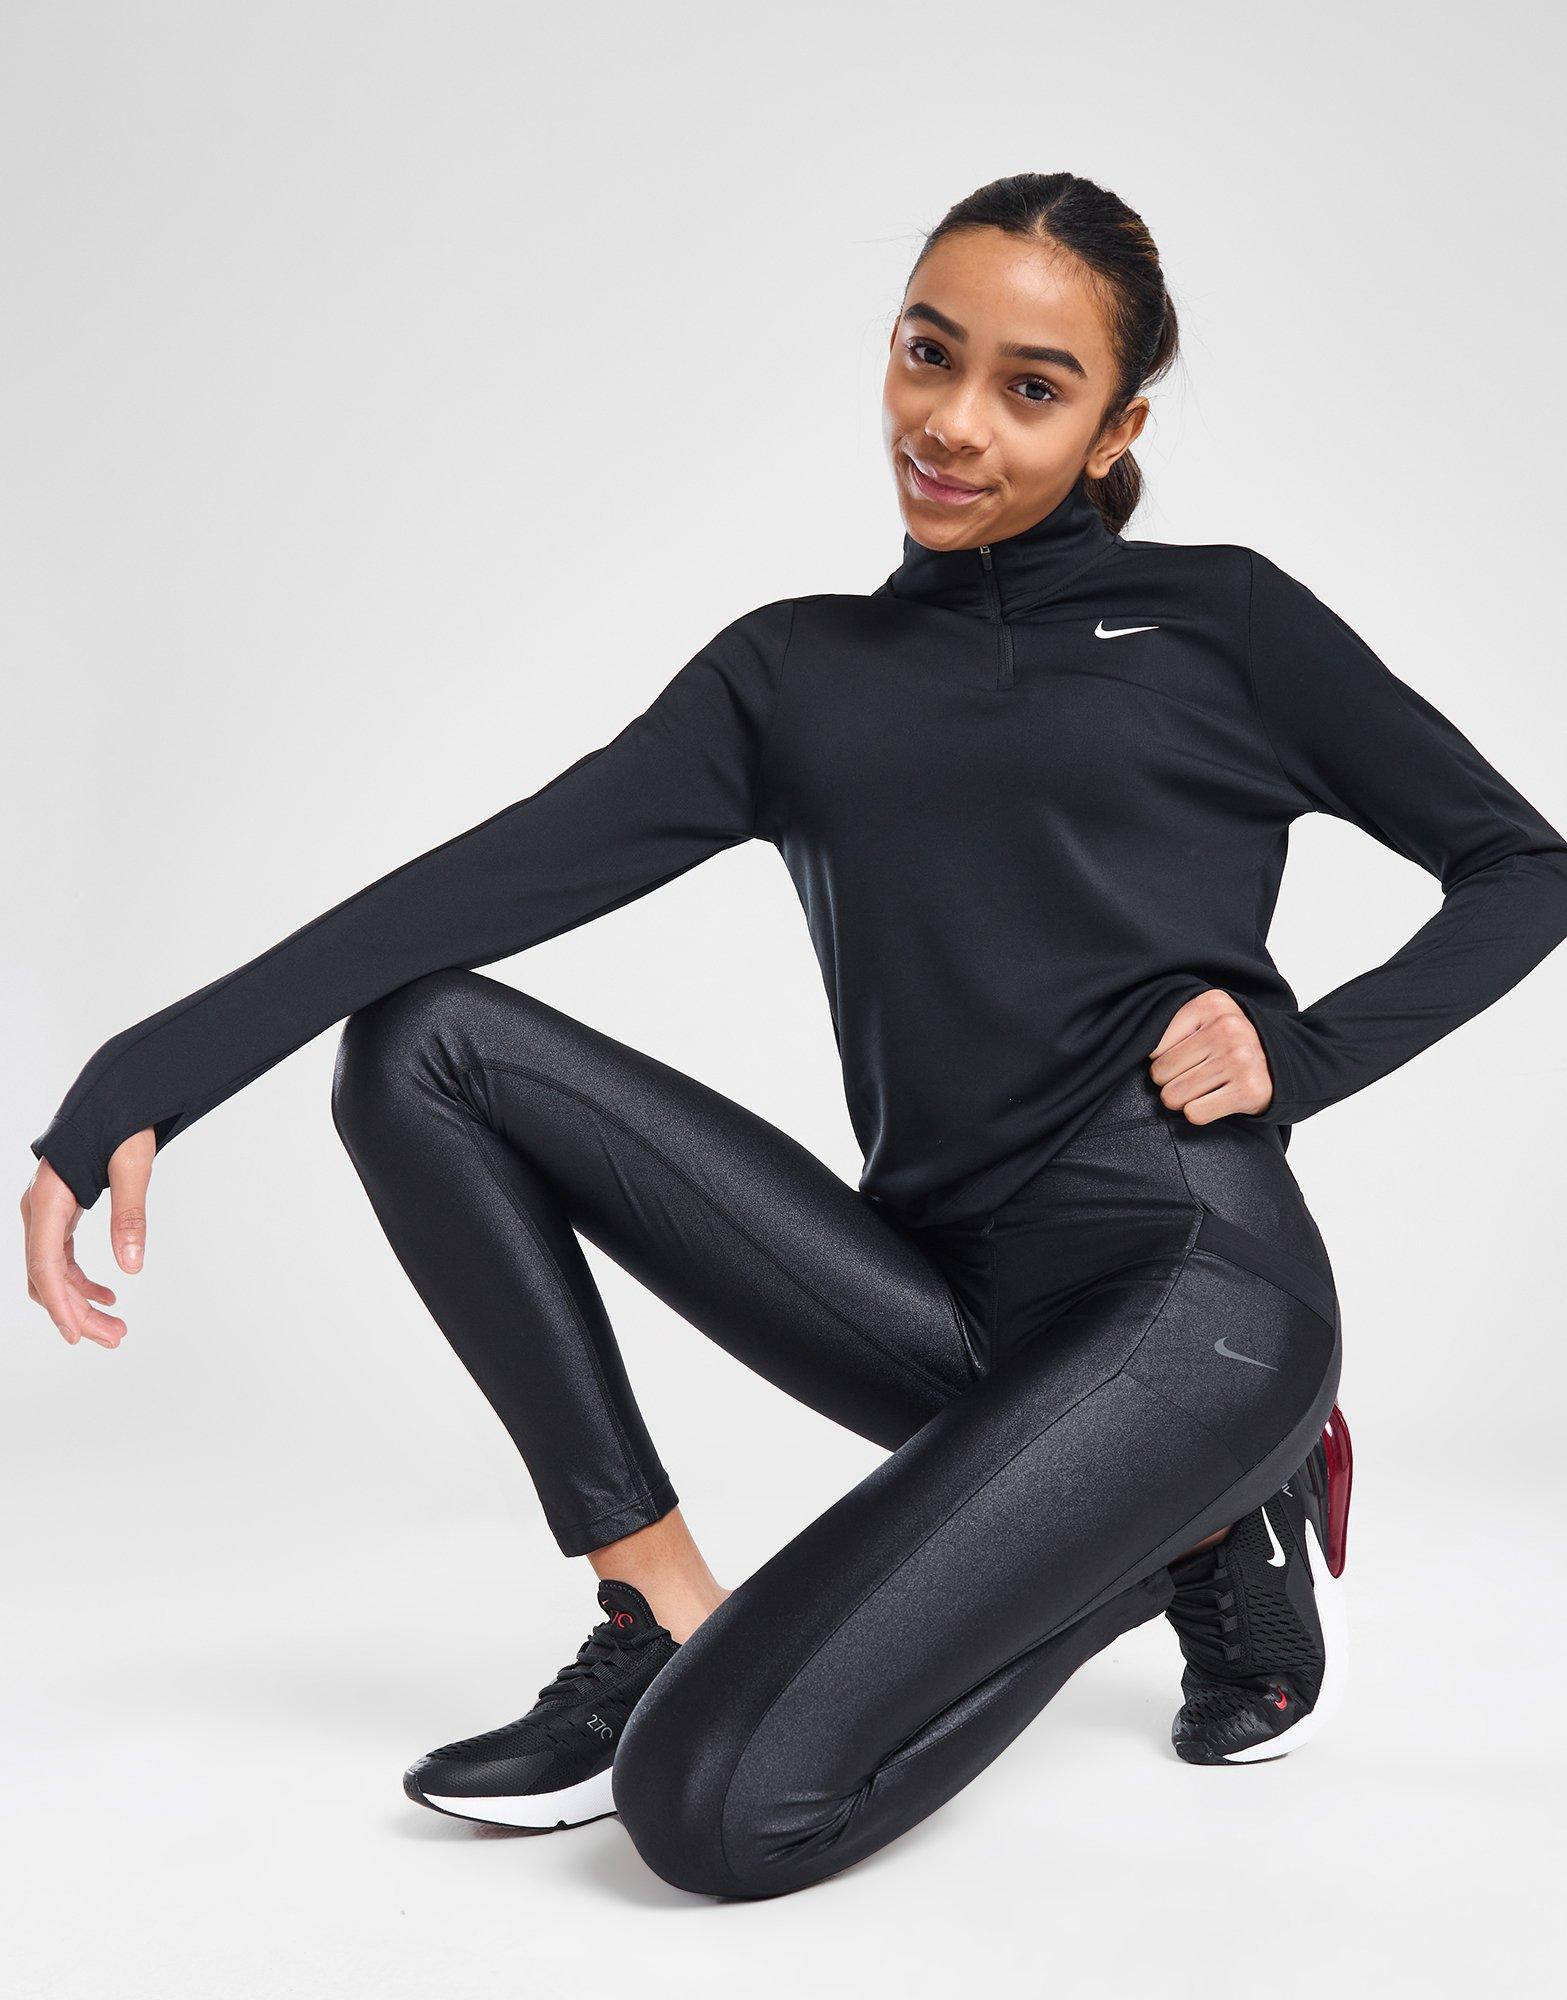 Nike, Other, New Nike Pro Sparkle Womens Training Tights